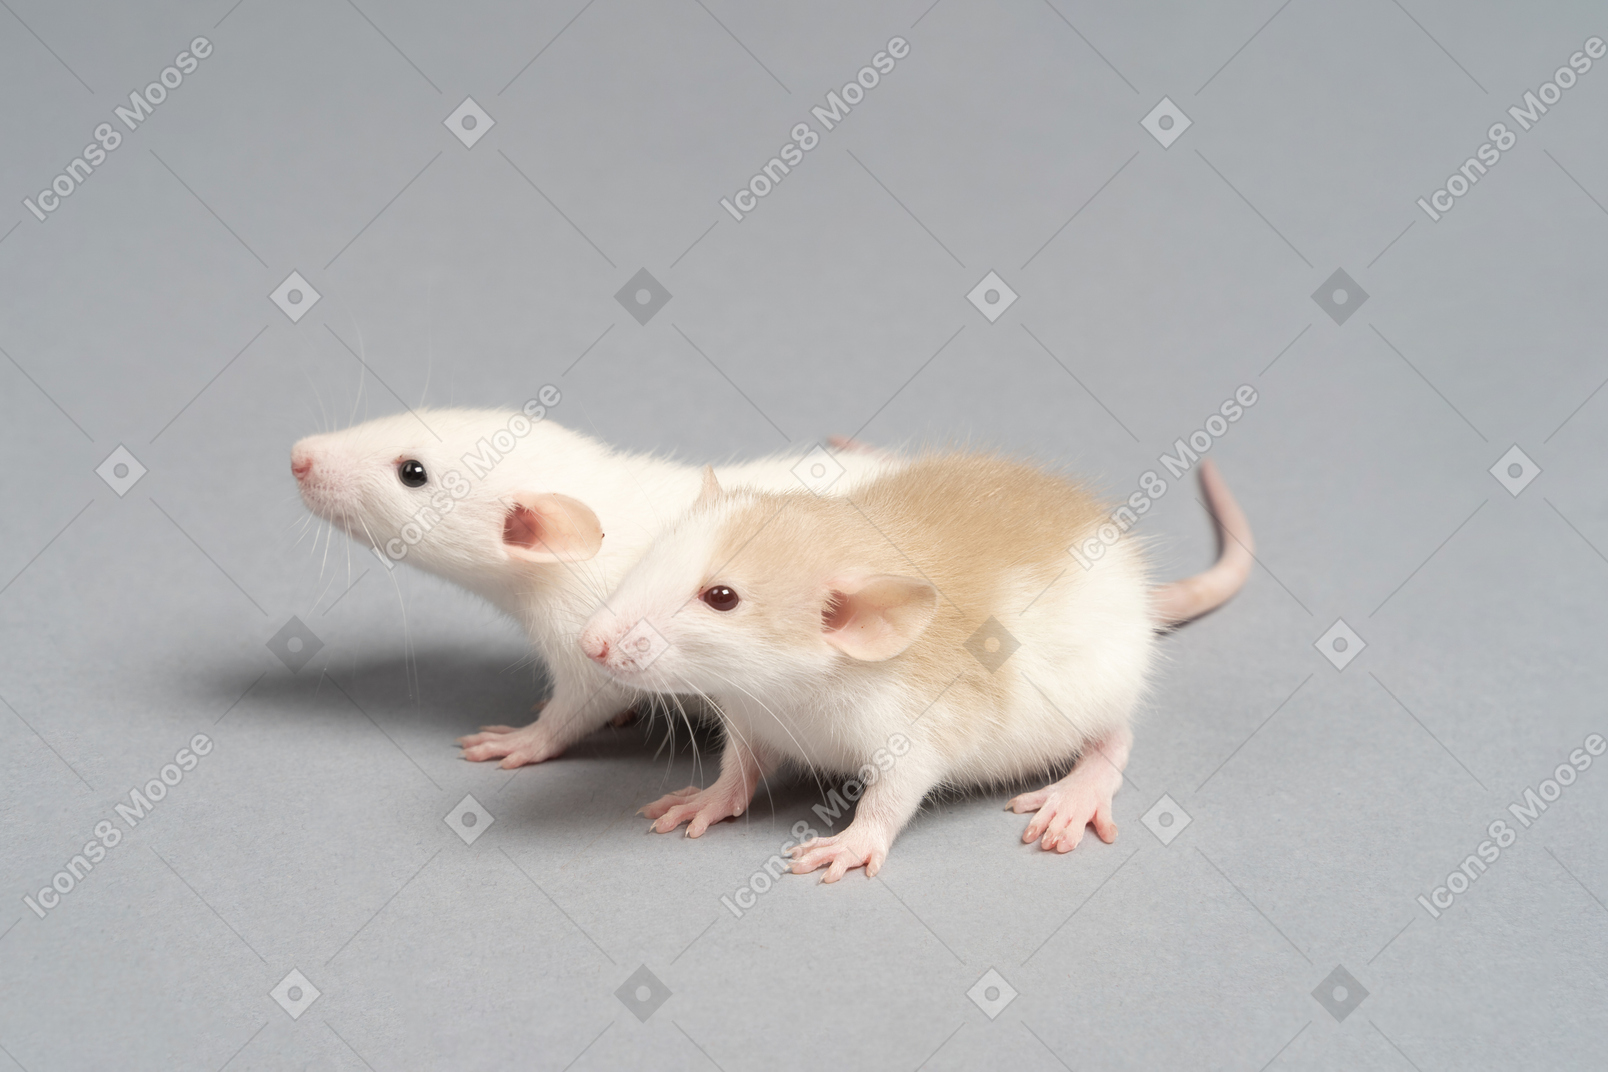 Two cute fluffy mice